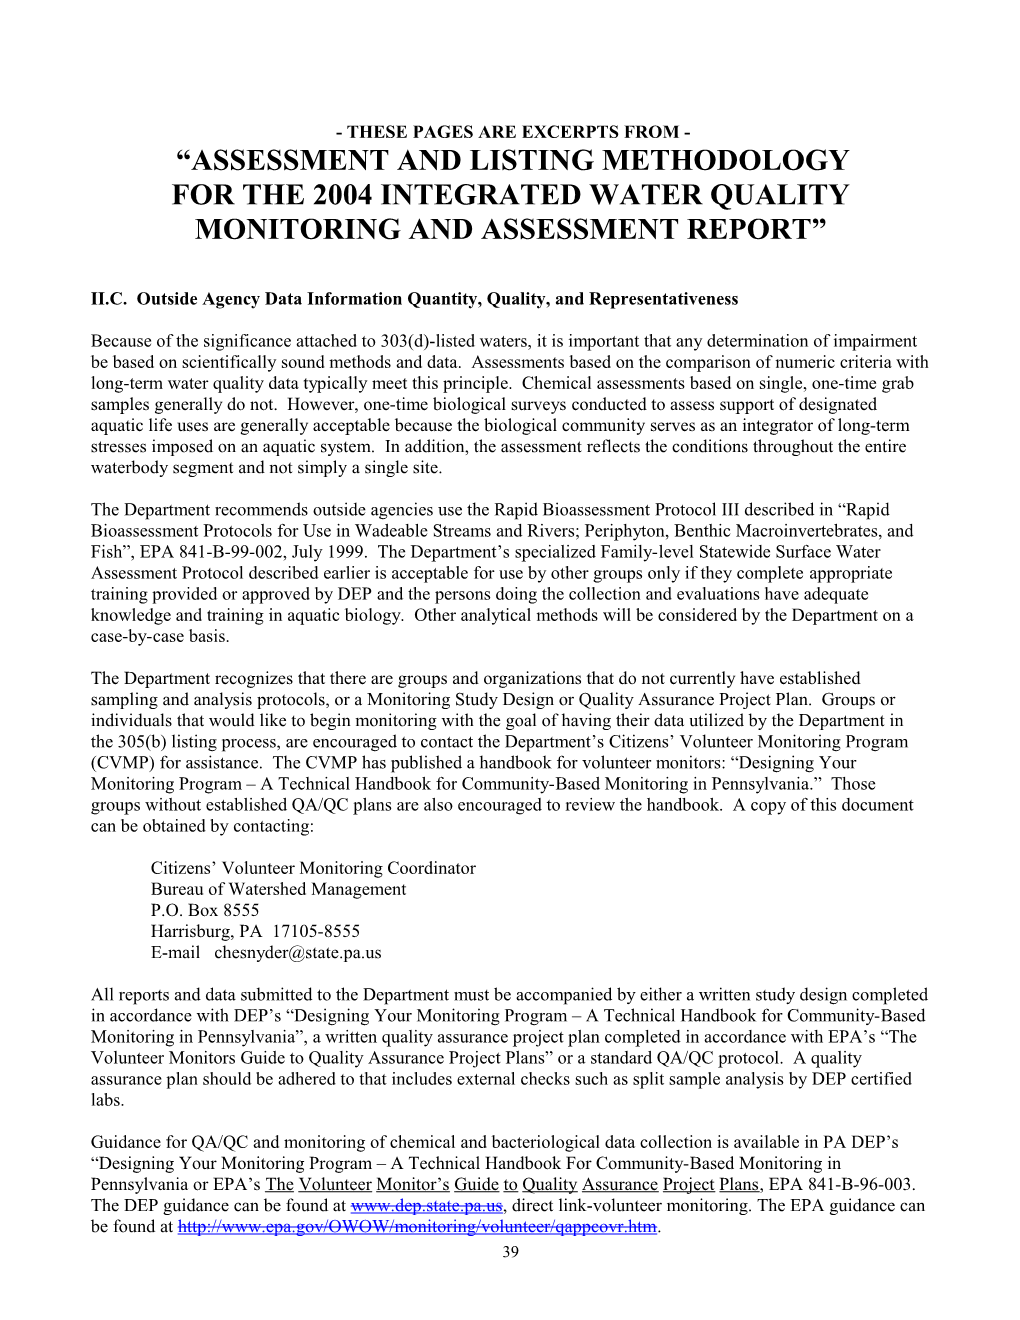 Integrated List Of Waters And Listing Methodology